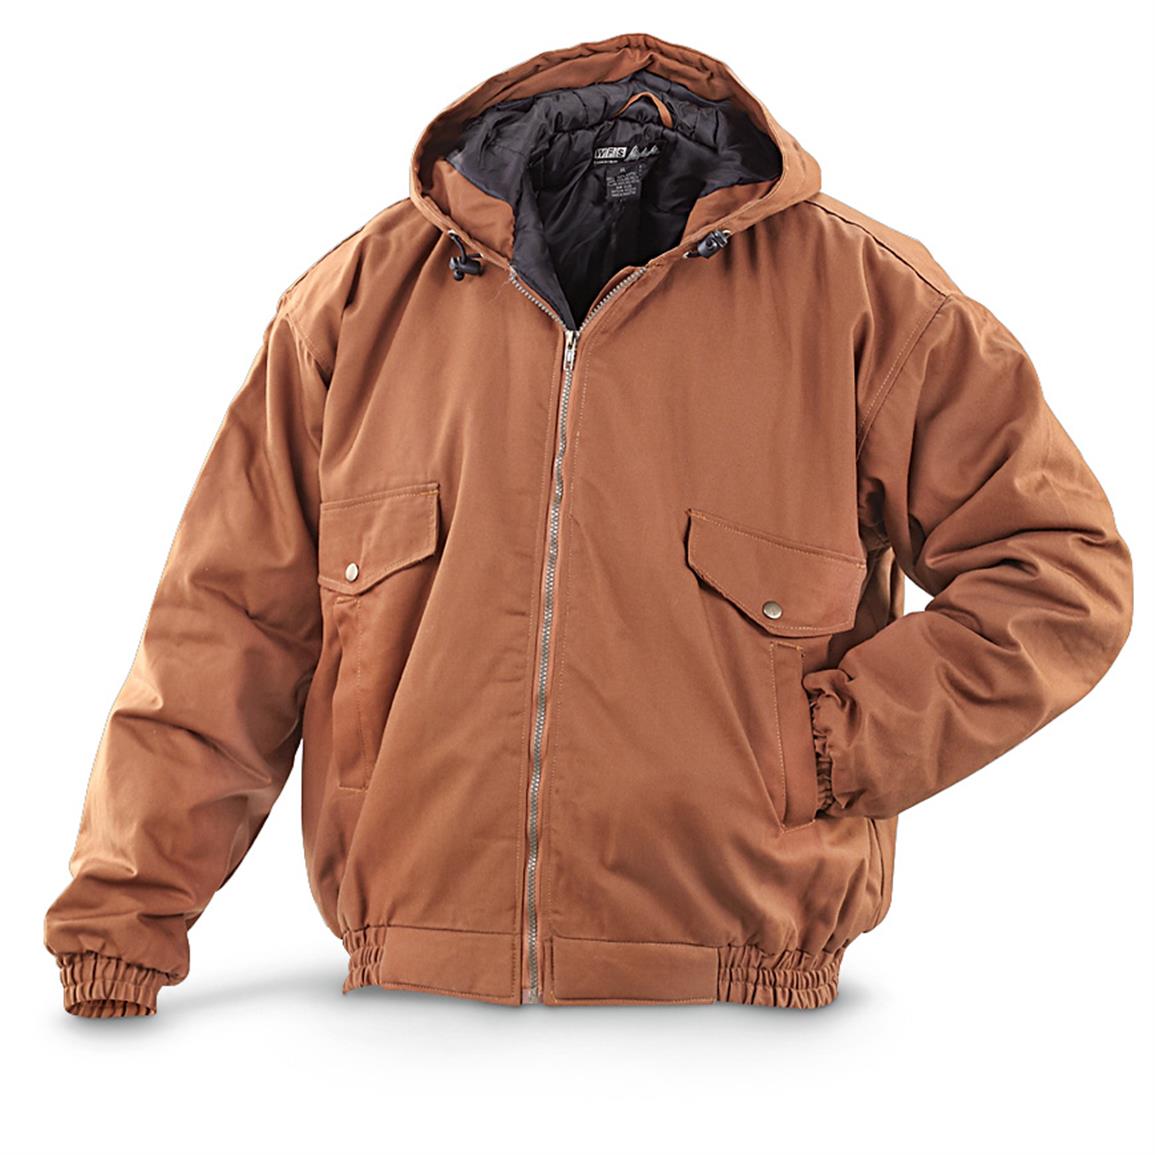 WFS Insulated Canvas Hooded Jacket - 609547, Insulated Jackets & Coats